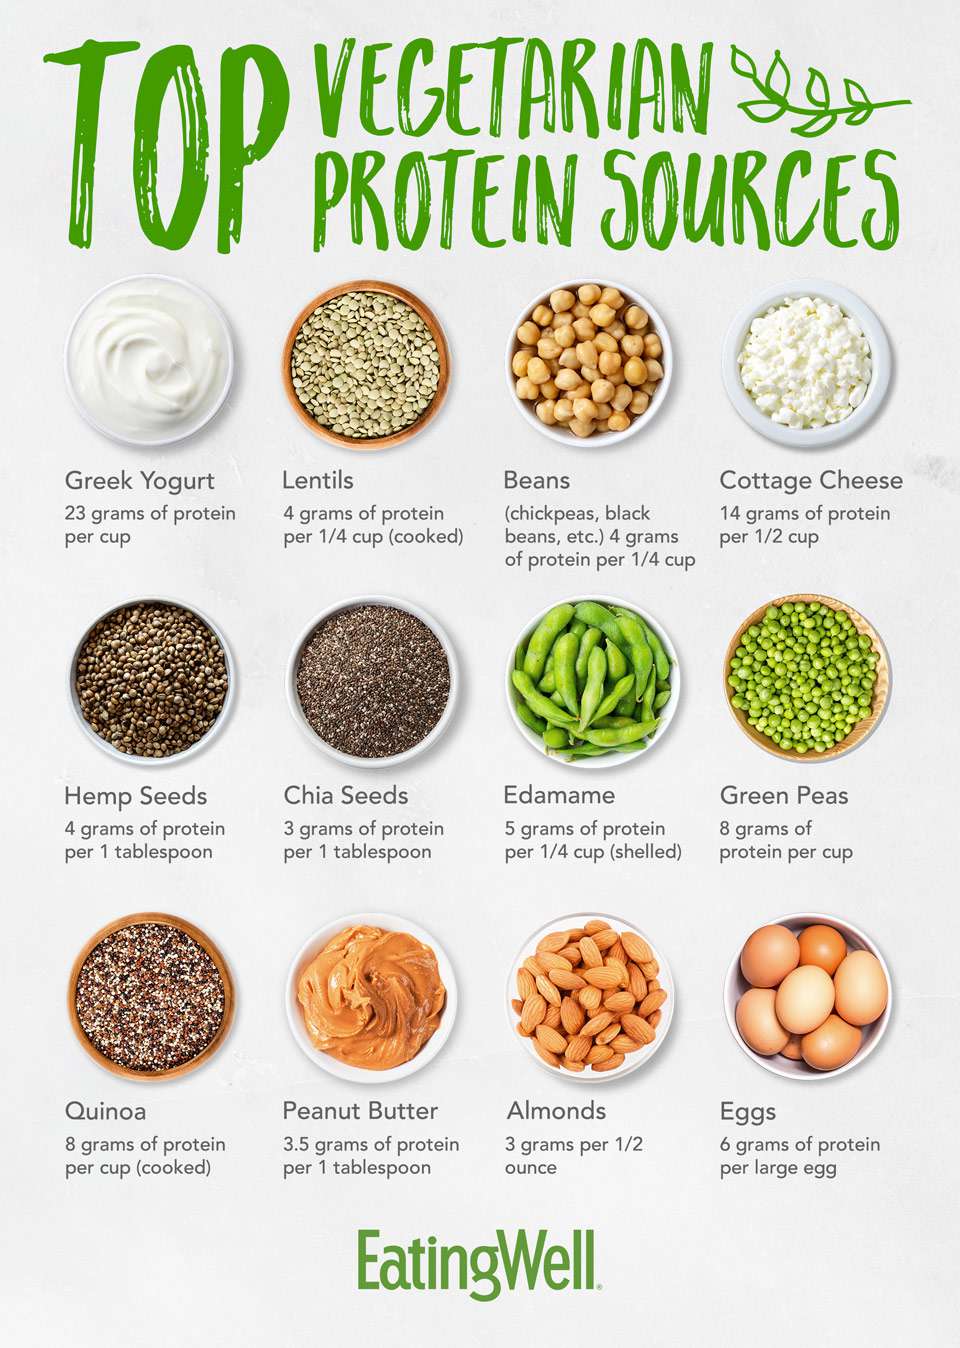 Top Vegetarian Protein Sources | EatingWell